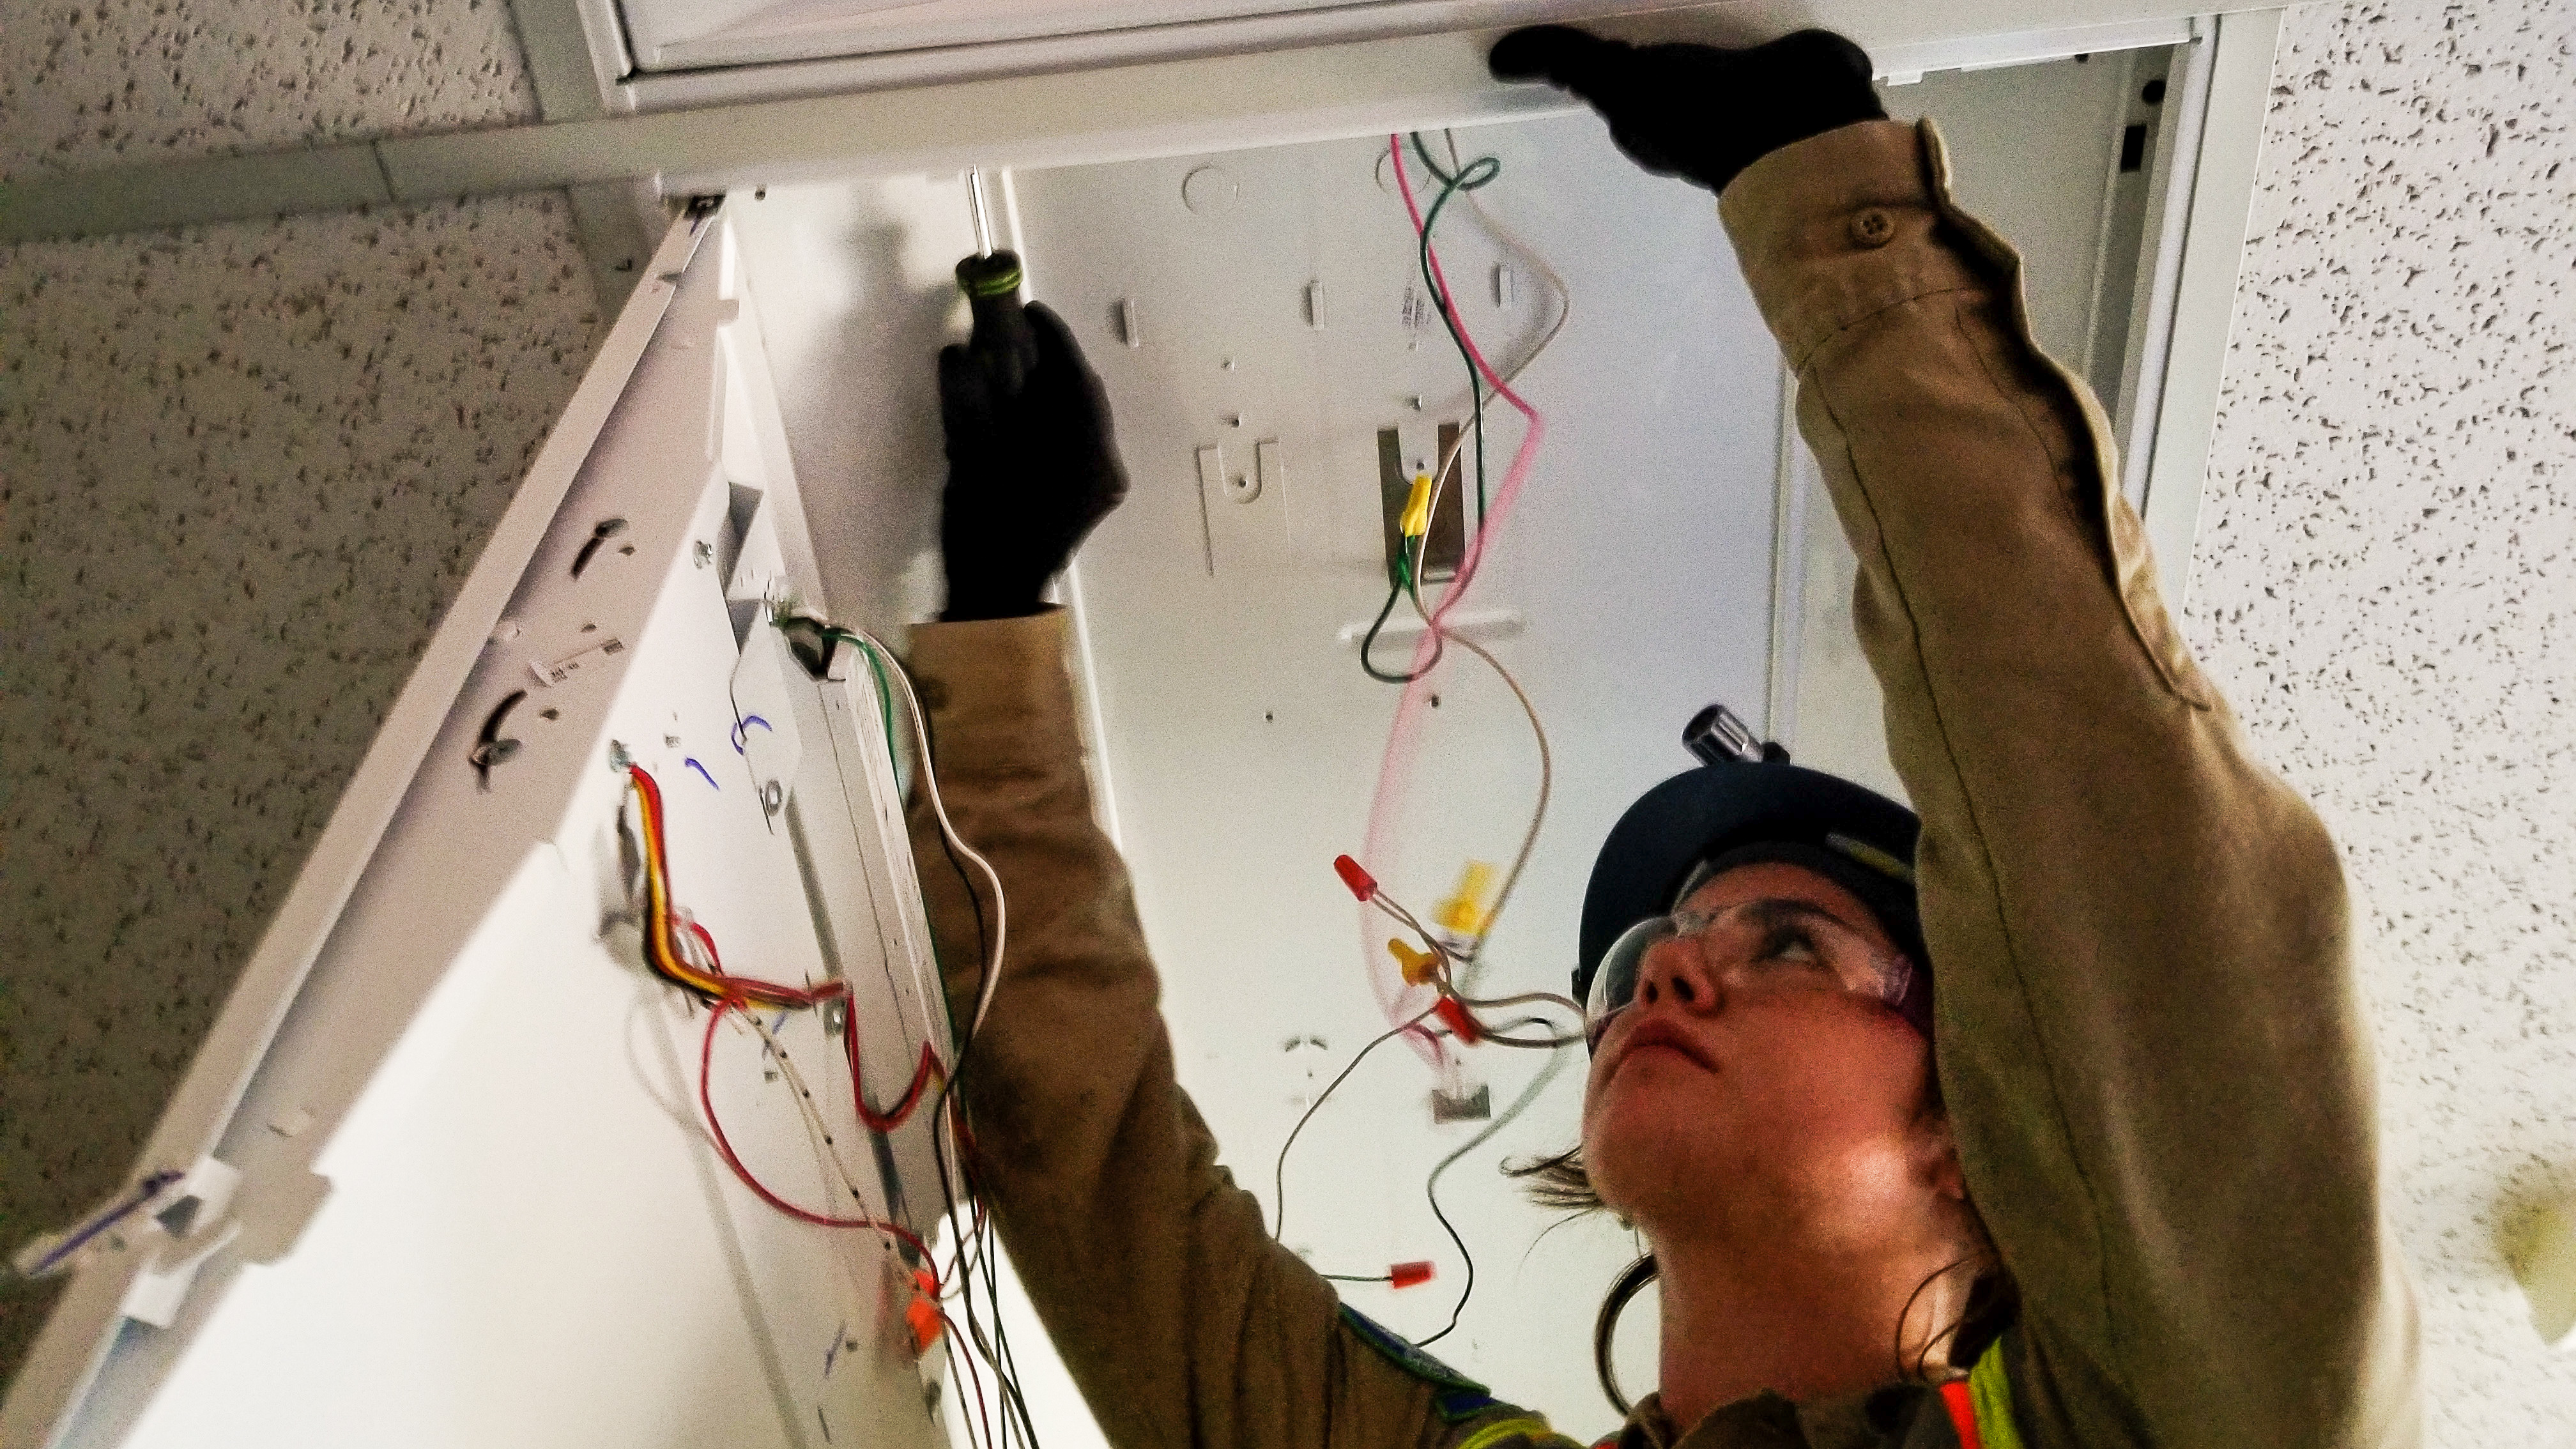 Image. Female Corpsmember in protectiv equipment looks at wires in overhead light fixture